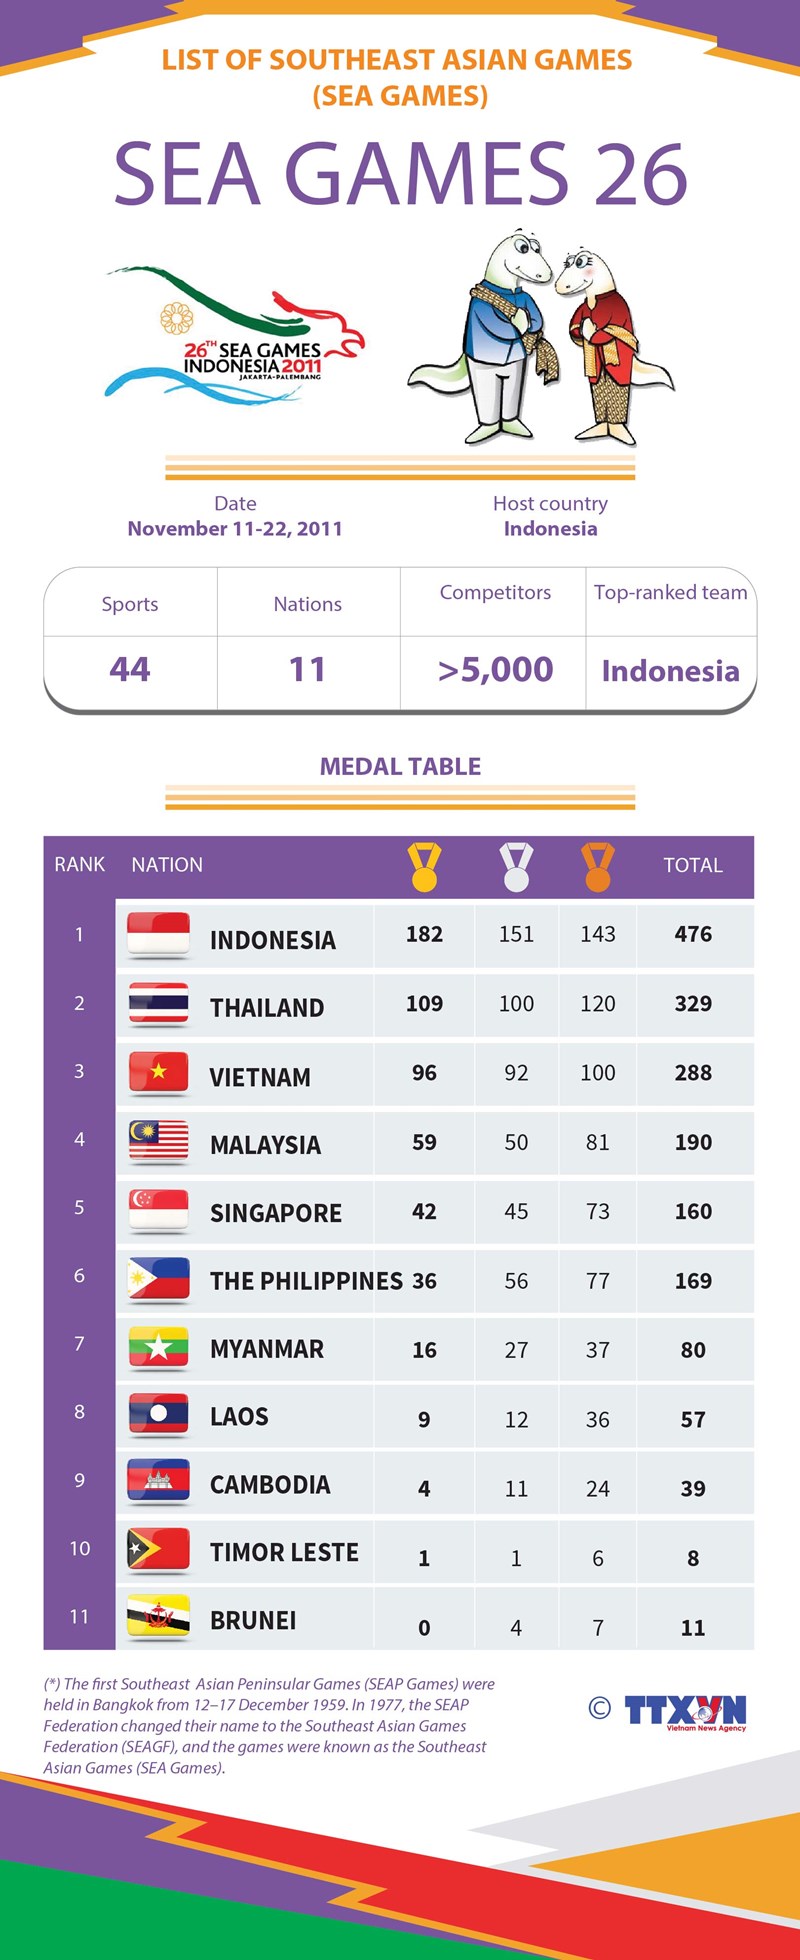 List of Southeast Asian Games: SEA Games 26 hinh anh 1